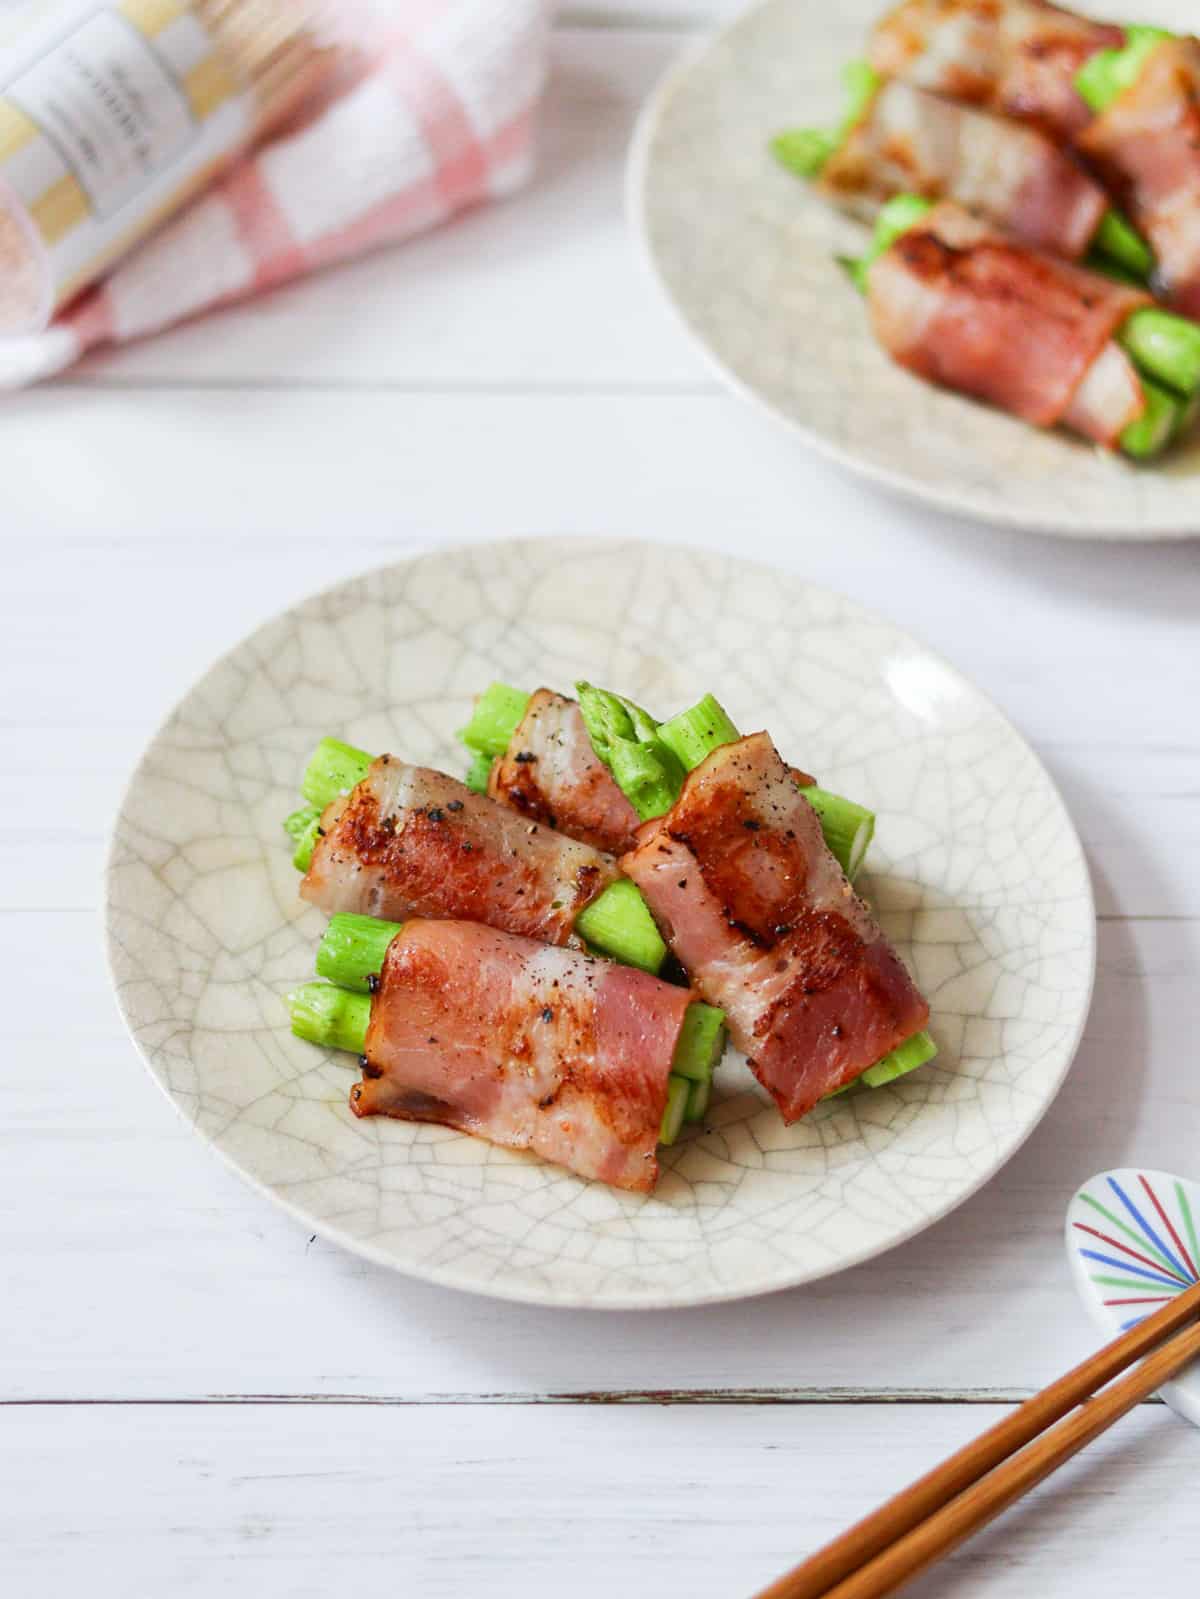 Japanese style bacon-wrapped asparagus